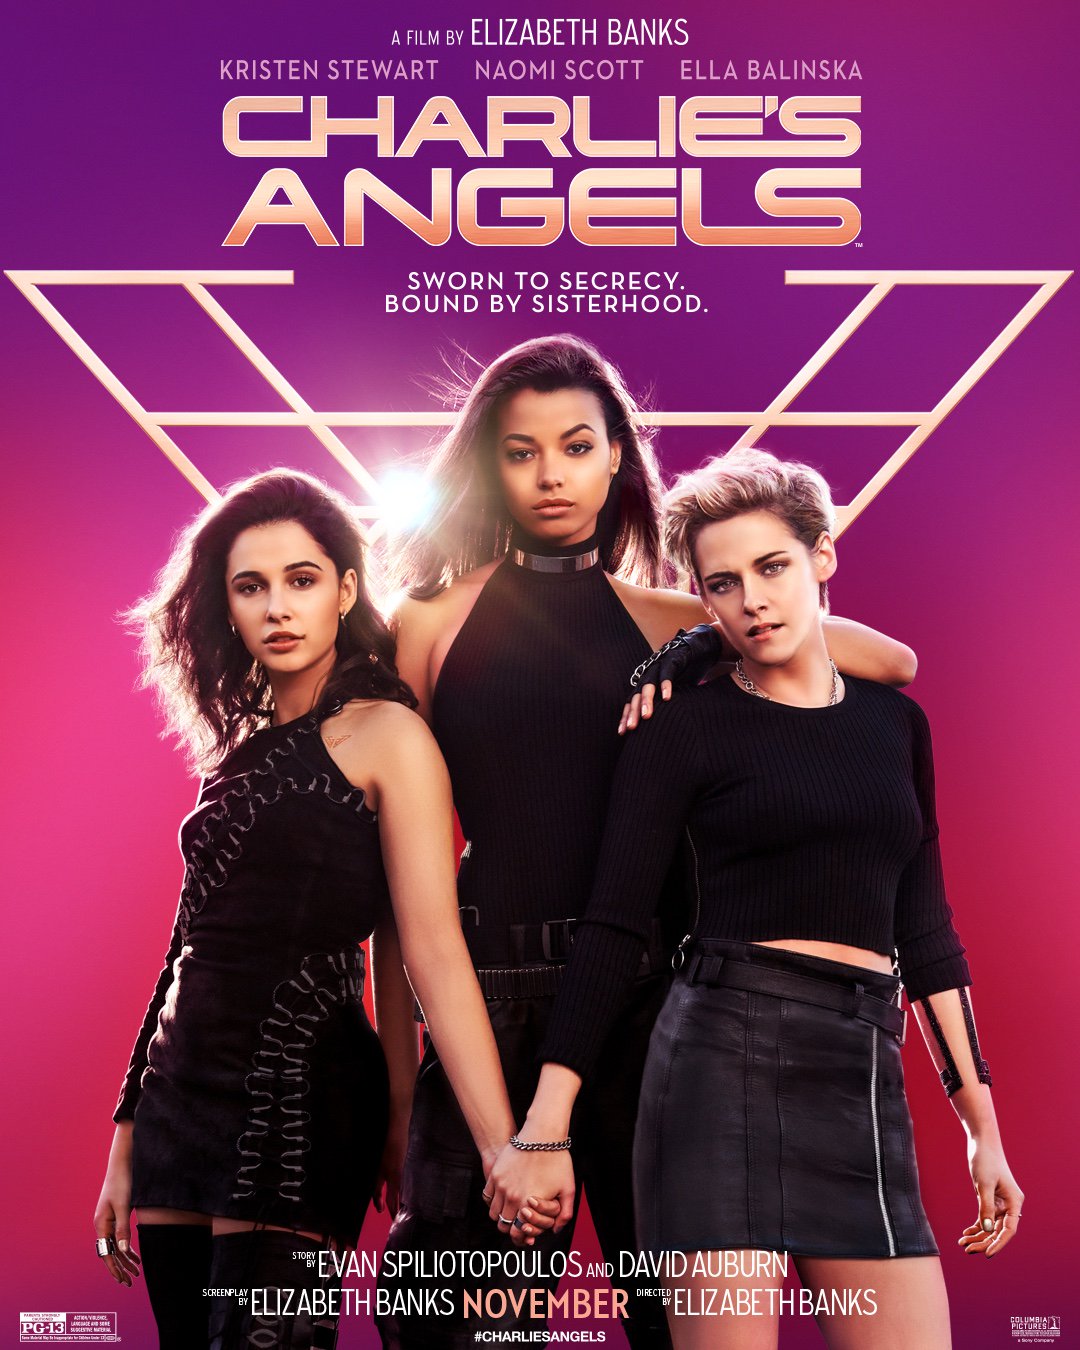 Charlies Angels Soundtrack Out Ft New Song From Ariana